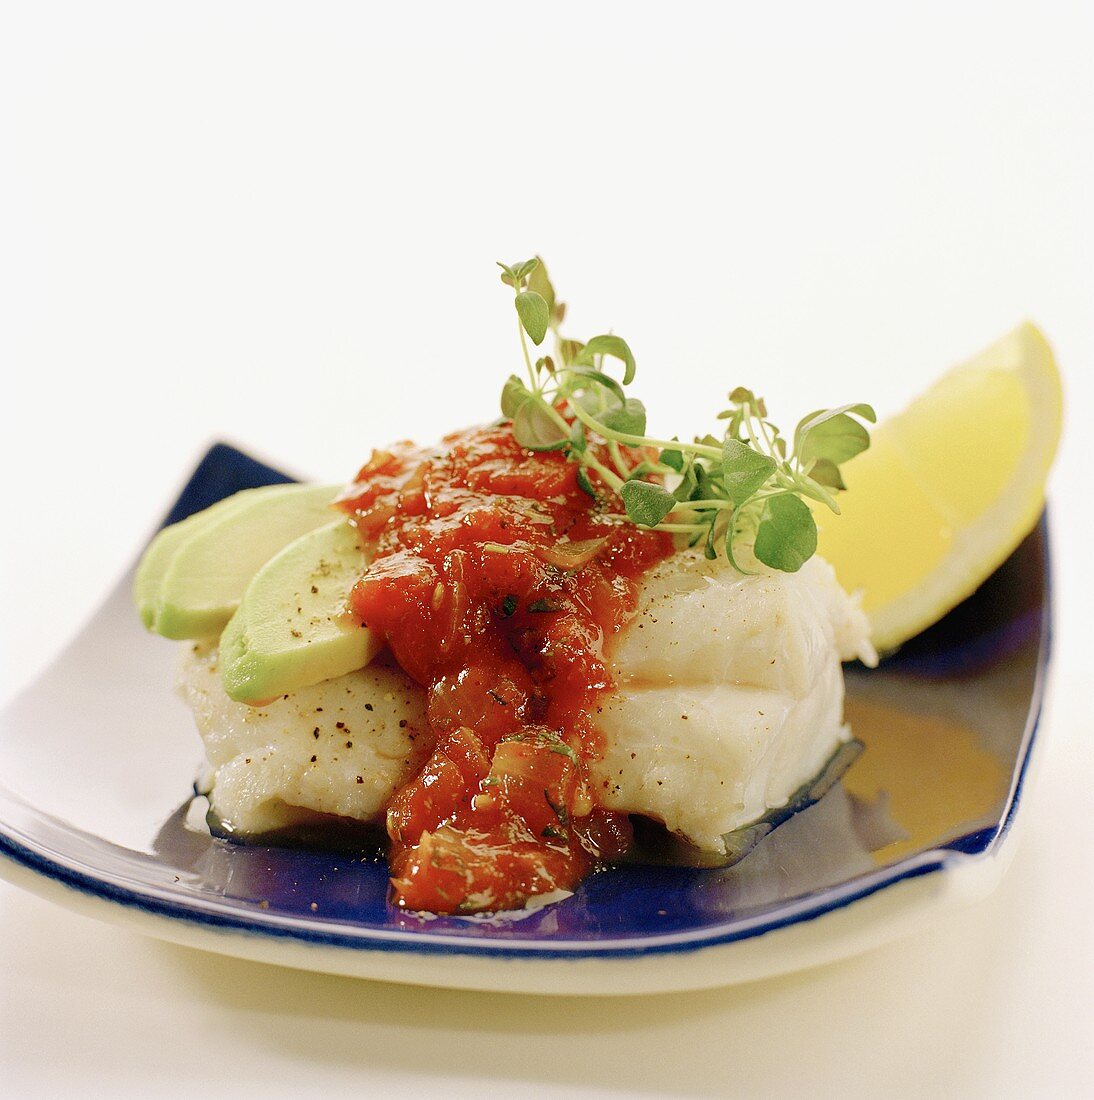 Fish fillet with tomato sauce and avocado